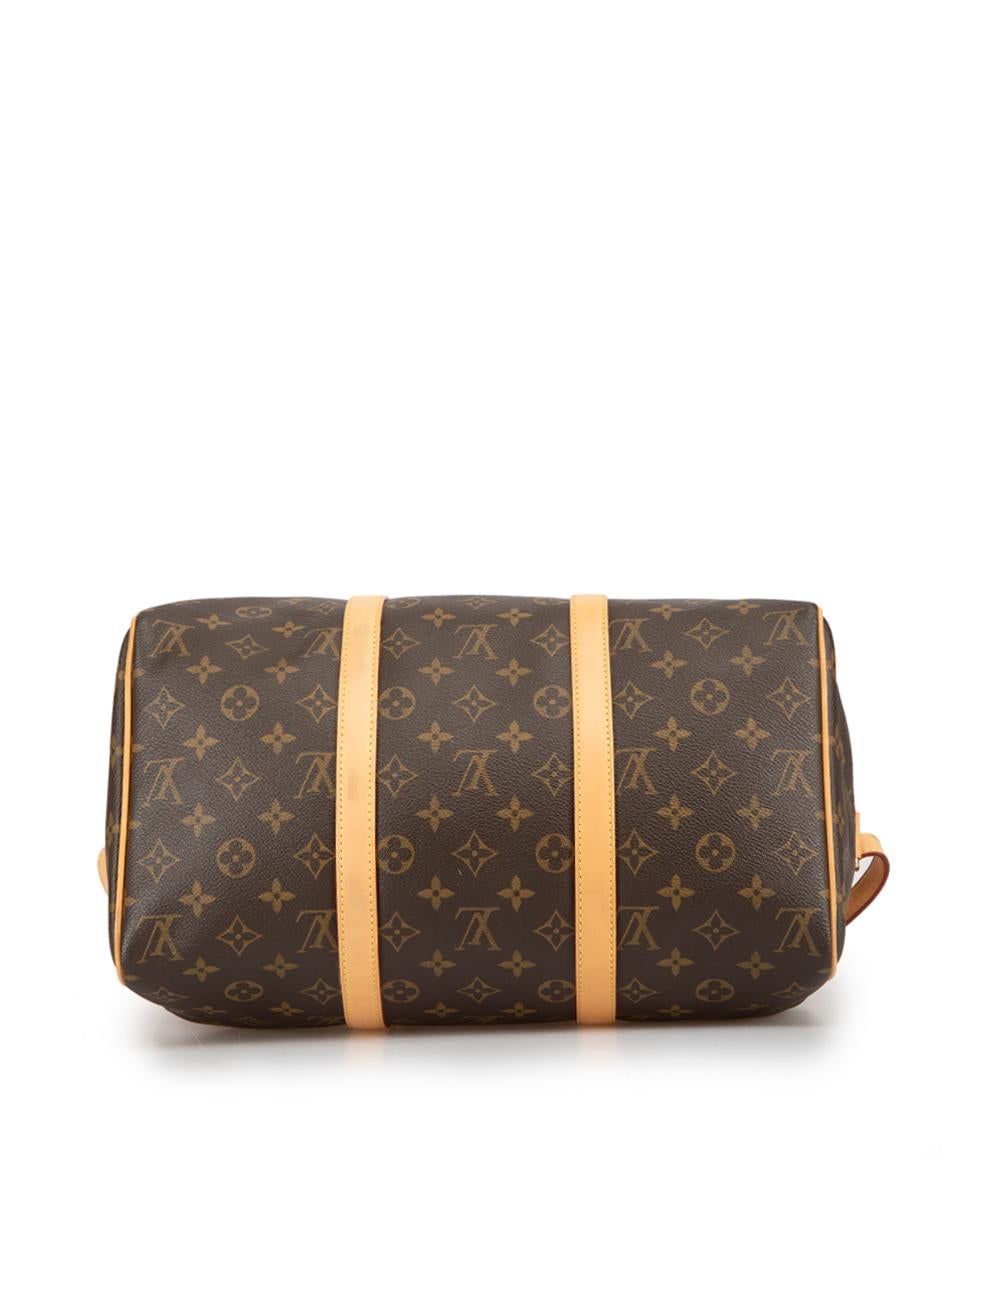 Louis Vuitton Women's Brown Leather Monogram Keepall Bandouliere 45 1